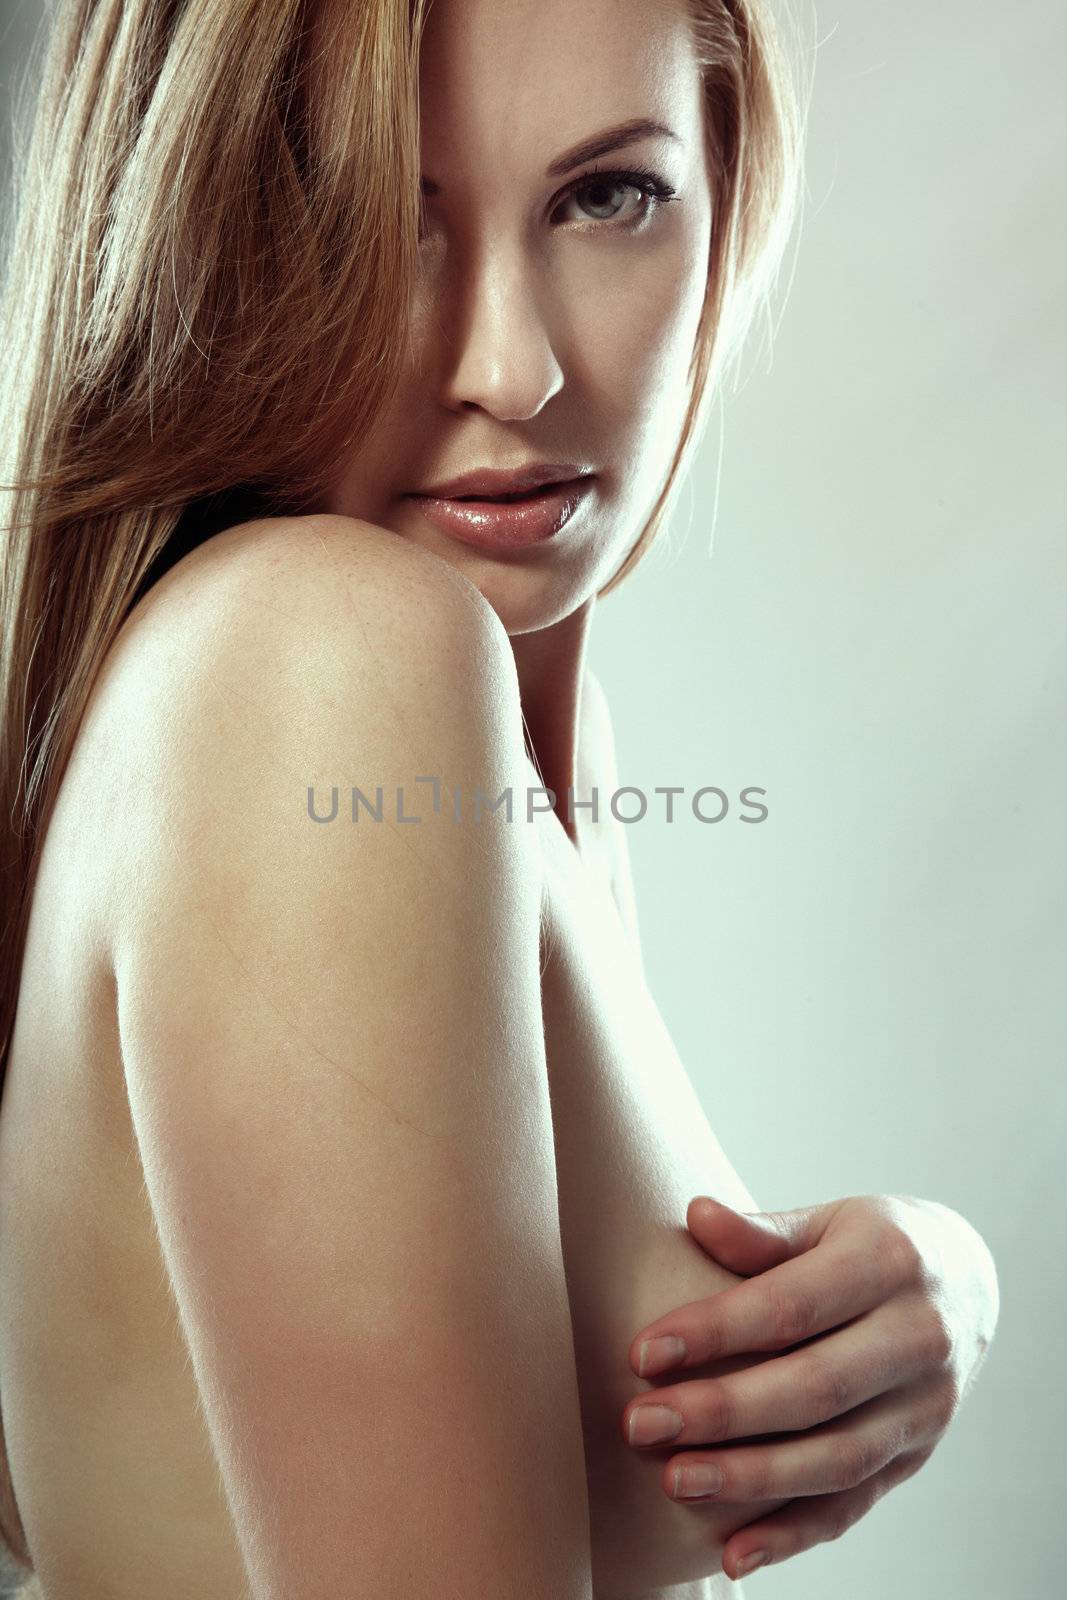 Beautiful blond lady embracing her naked breast. Studio shot